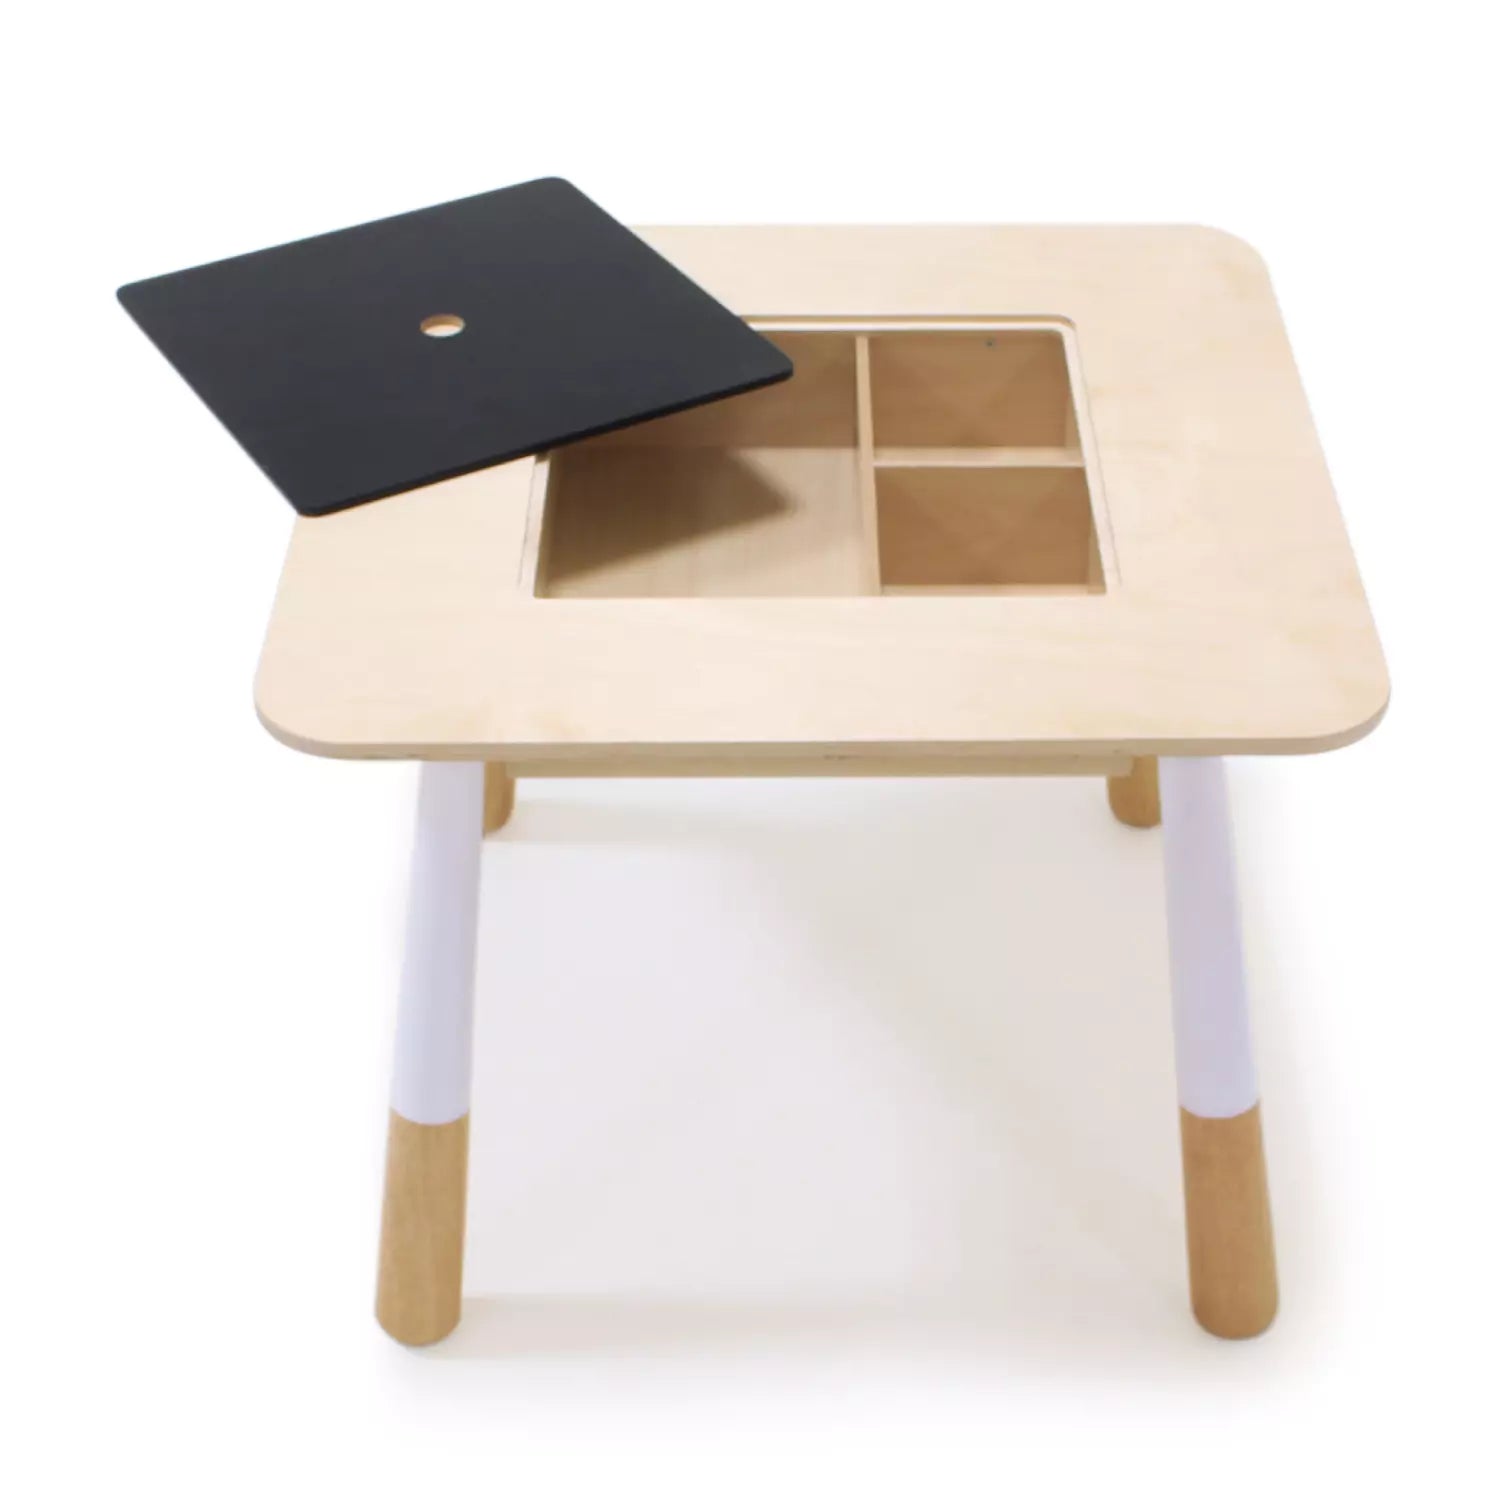 An image of Forest Table with Removable Chalkboard Panel